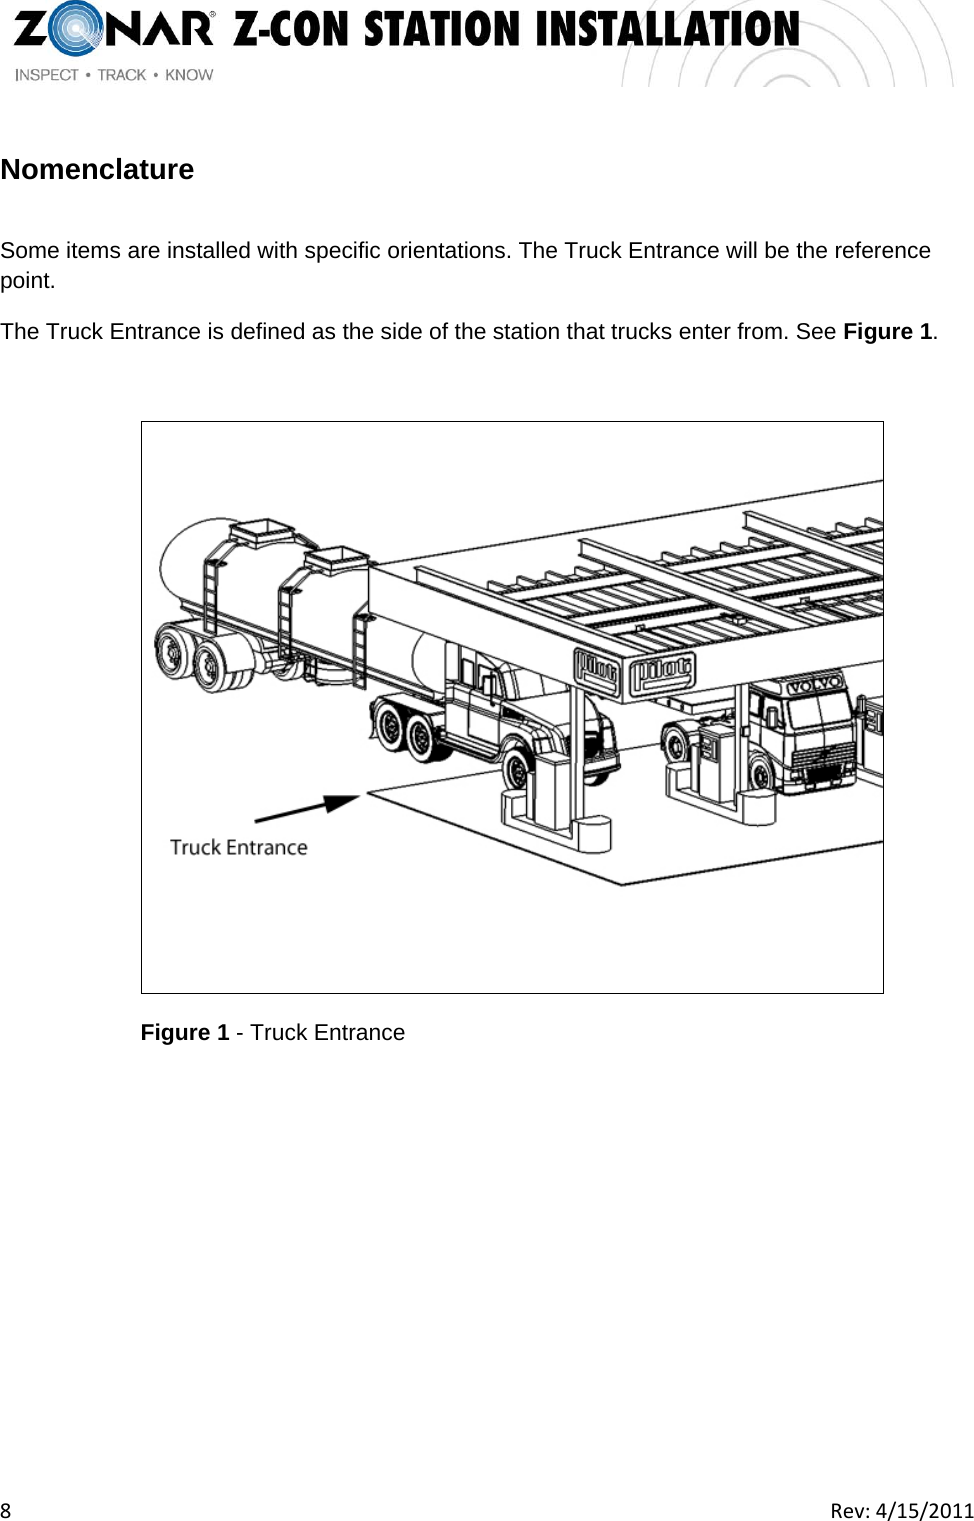   8  Rev:4/15/2011  Nomenclature  Some items are installed with specific orientations. The Truck Entrance will be the reference point. The Truck Entrance is defined as the side of the station that trucks enter from. See Figure 1.   Figure 1 - Truck Entrance 